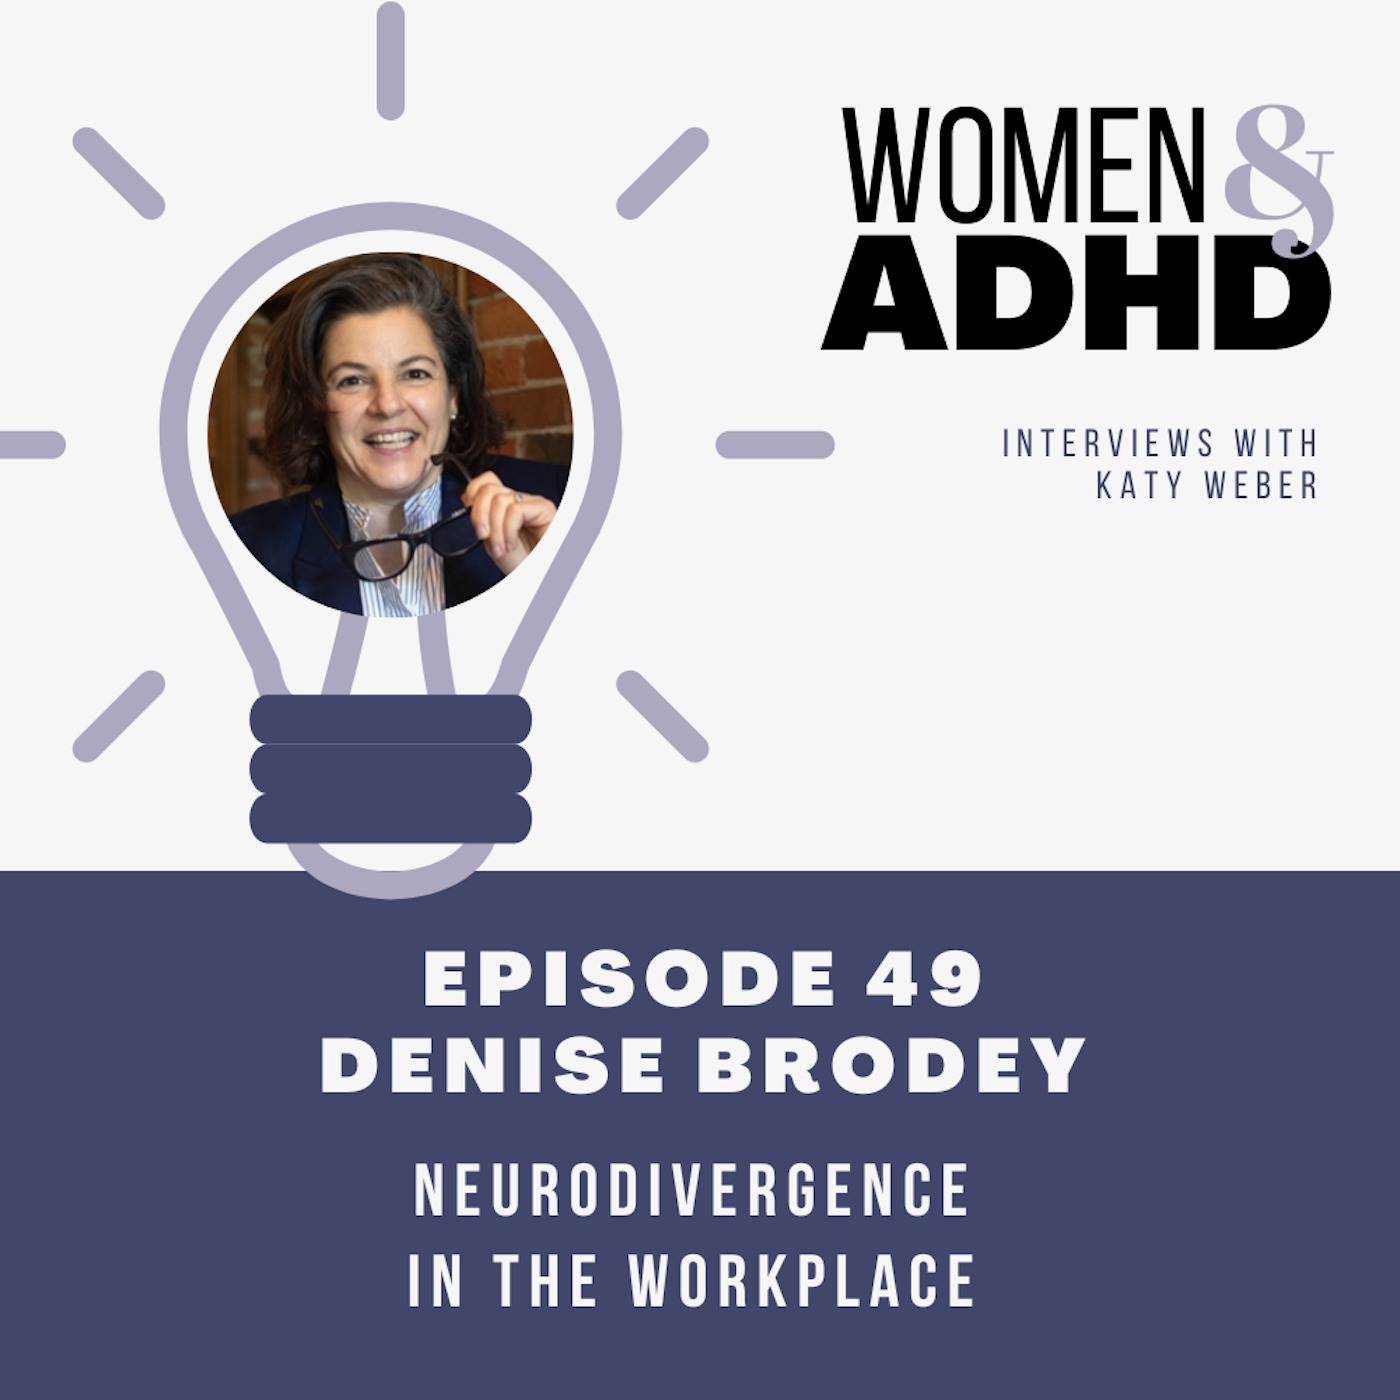 Denise Brodey: Neurodivergence in the workplace